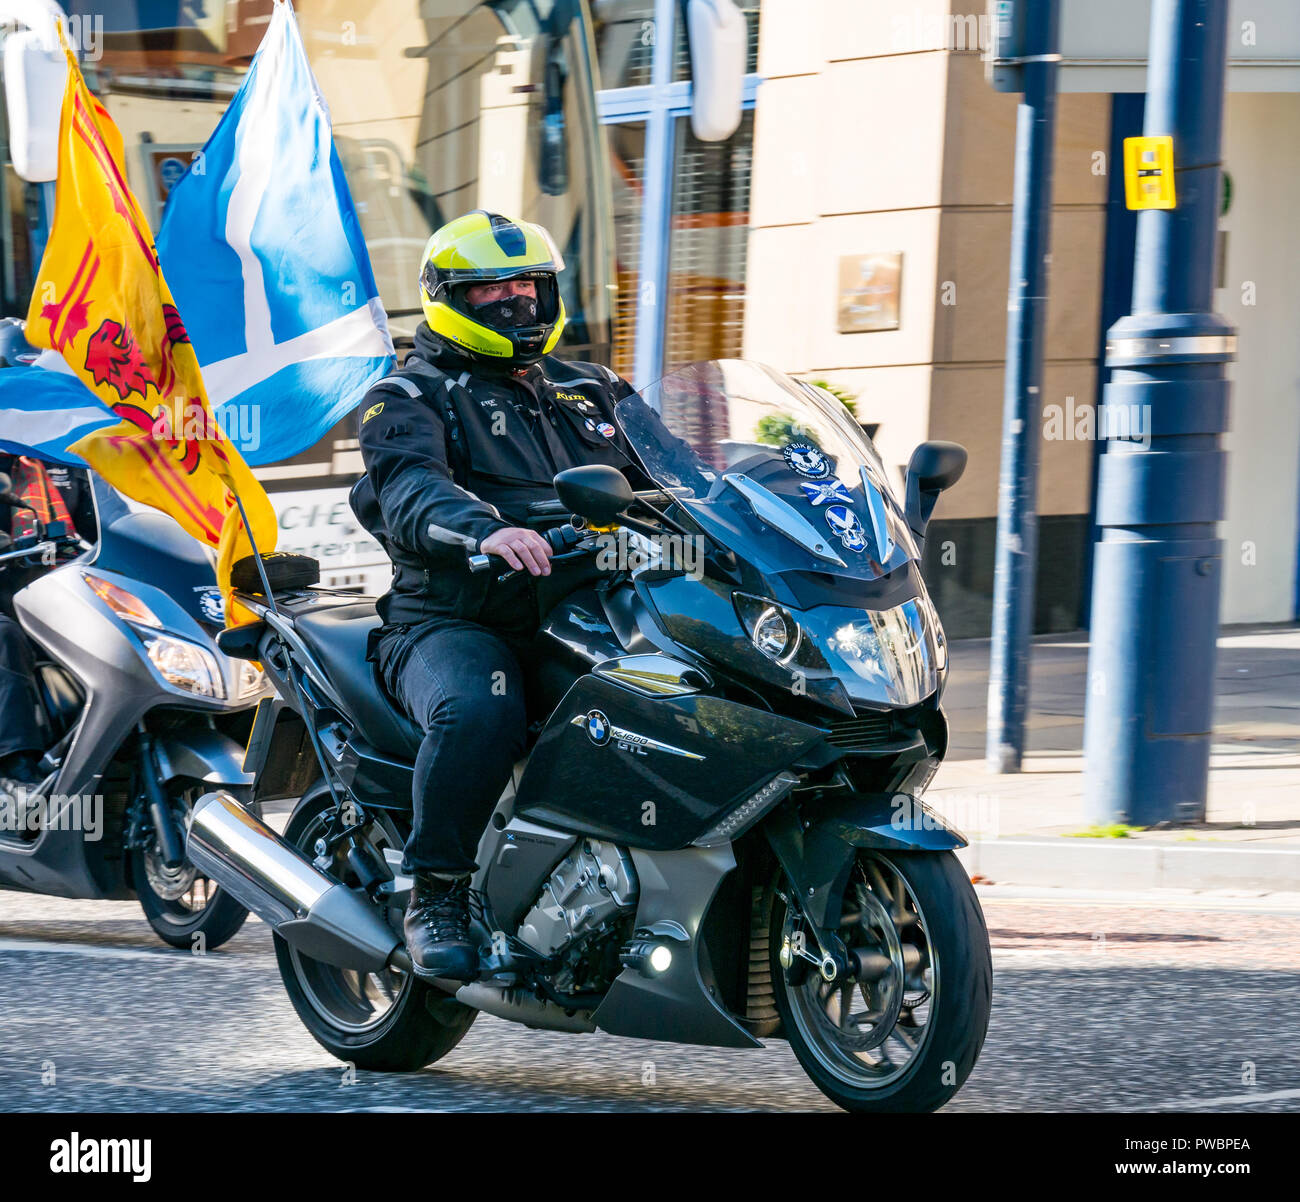 Scottish Independence Yes bikers on way to joining All Under One Banner AUOB rally, Holyrood Road, Edinburgh, Scotland, UK Stock Photo